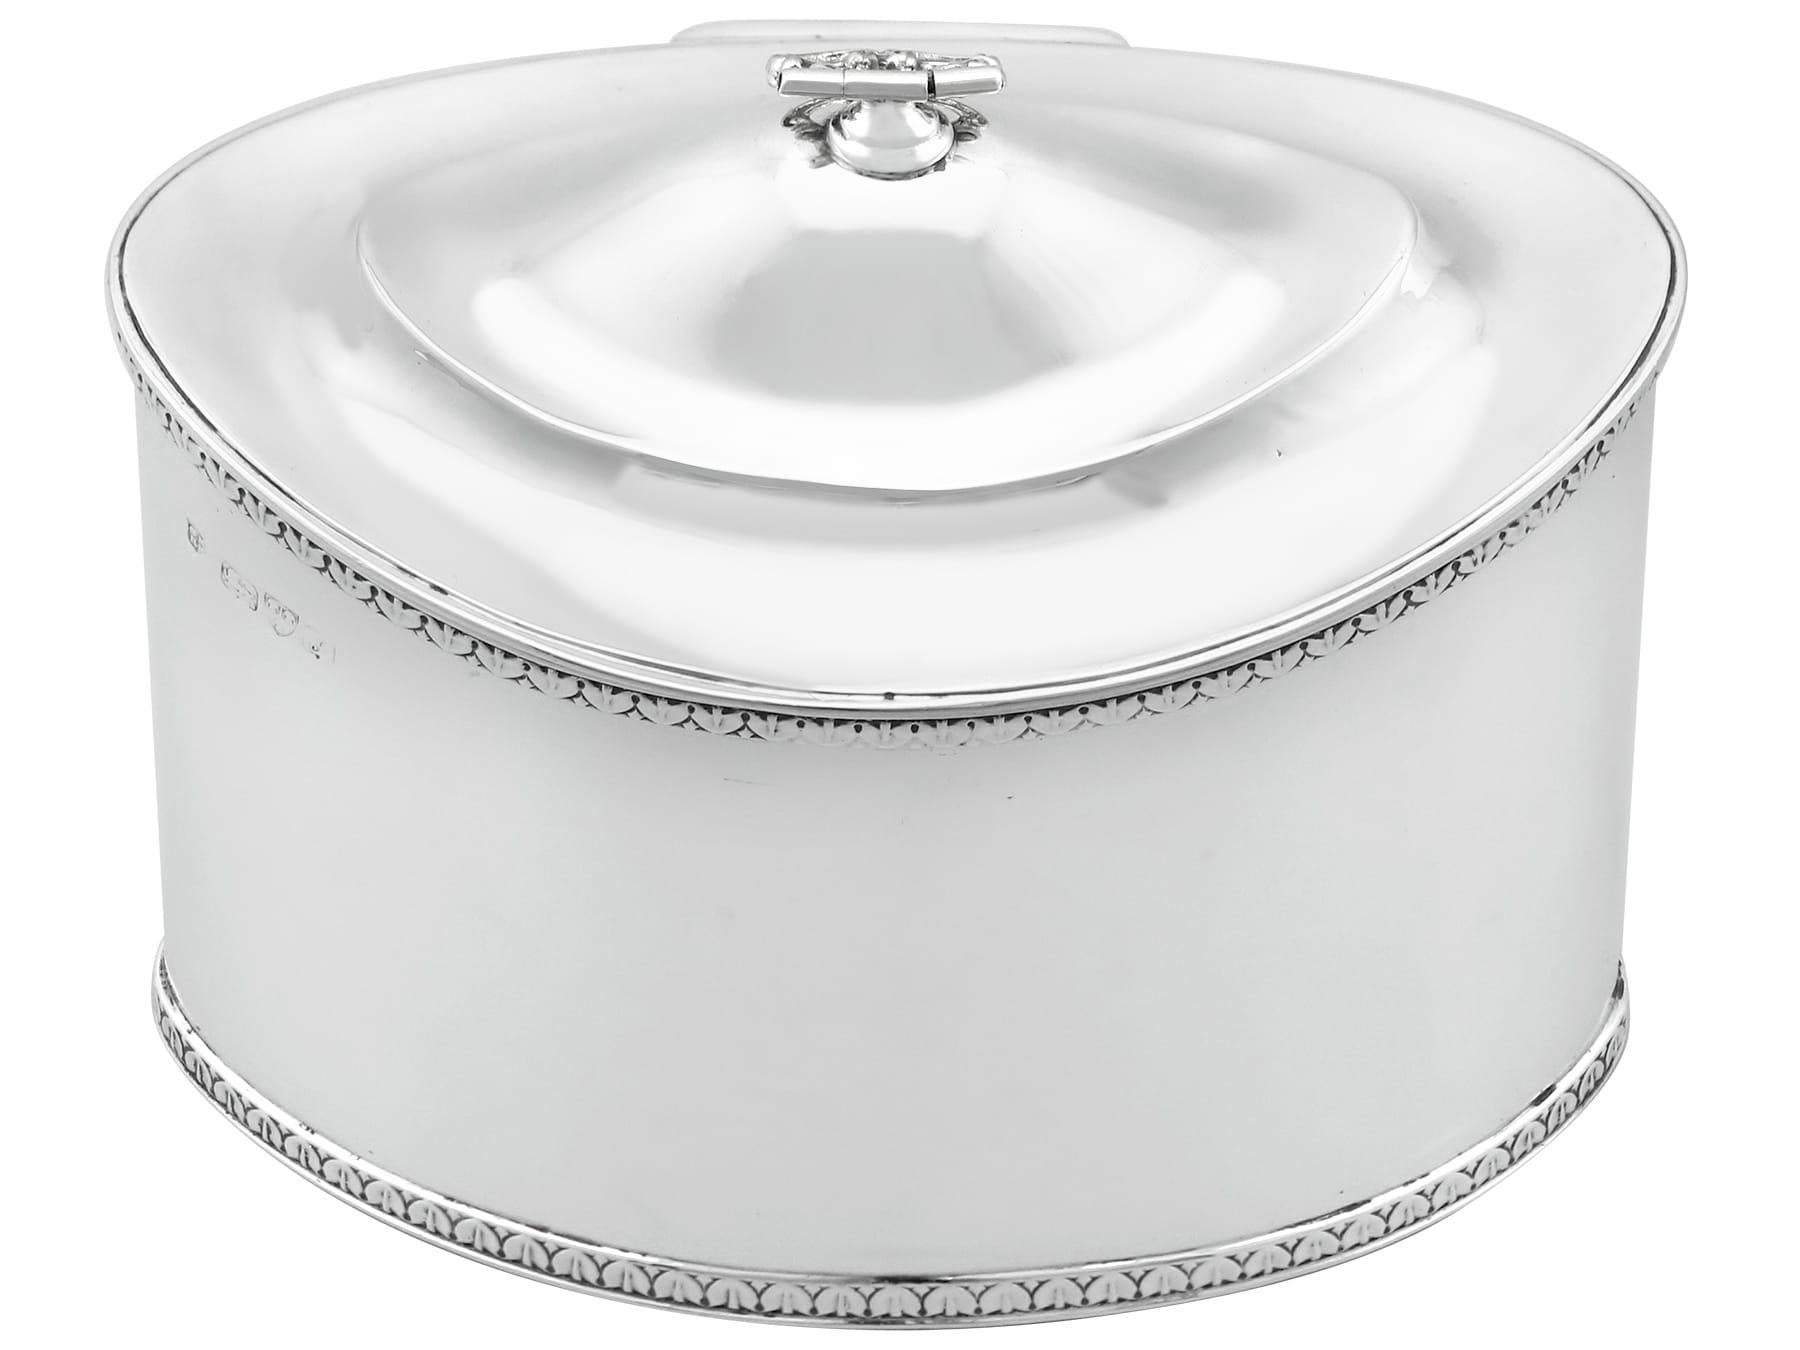 An exceptional, fine and impressive antique Edwardian English sterling silver tea caddy; an addition to our silver teaware collection

This exceptional antique Edwardian tea caddy in sterling silver has an oval form.

The surface of this fine silver